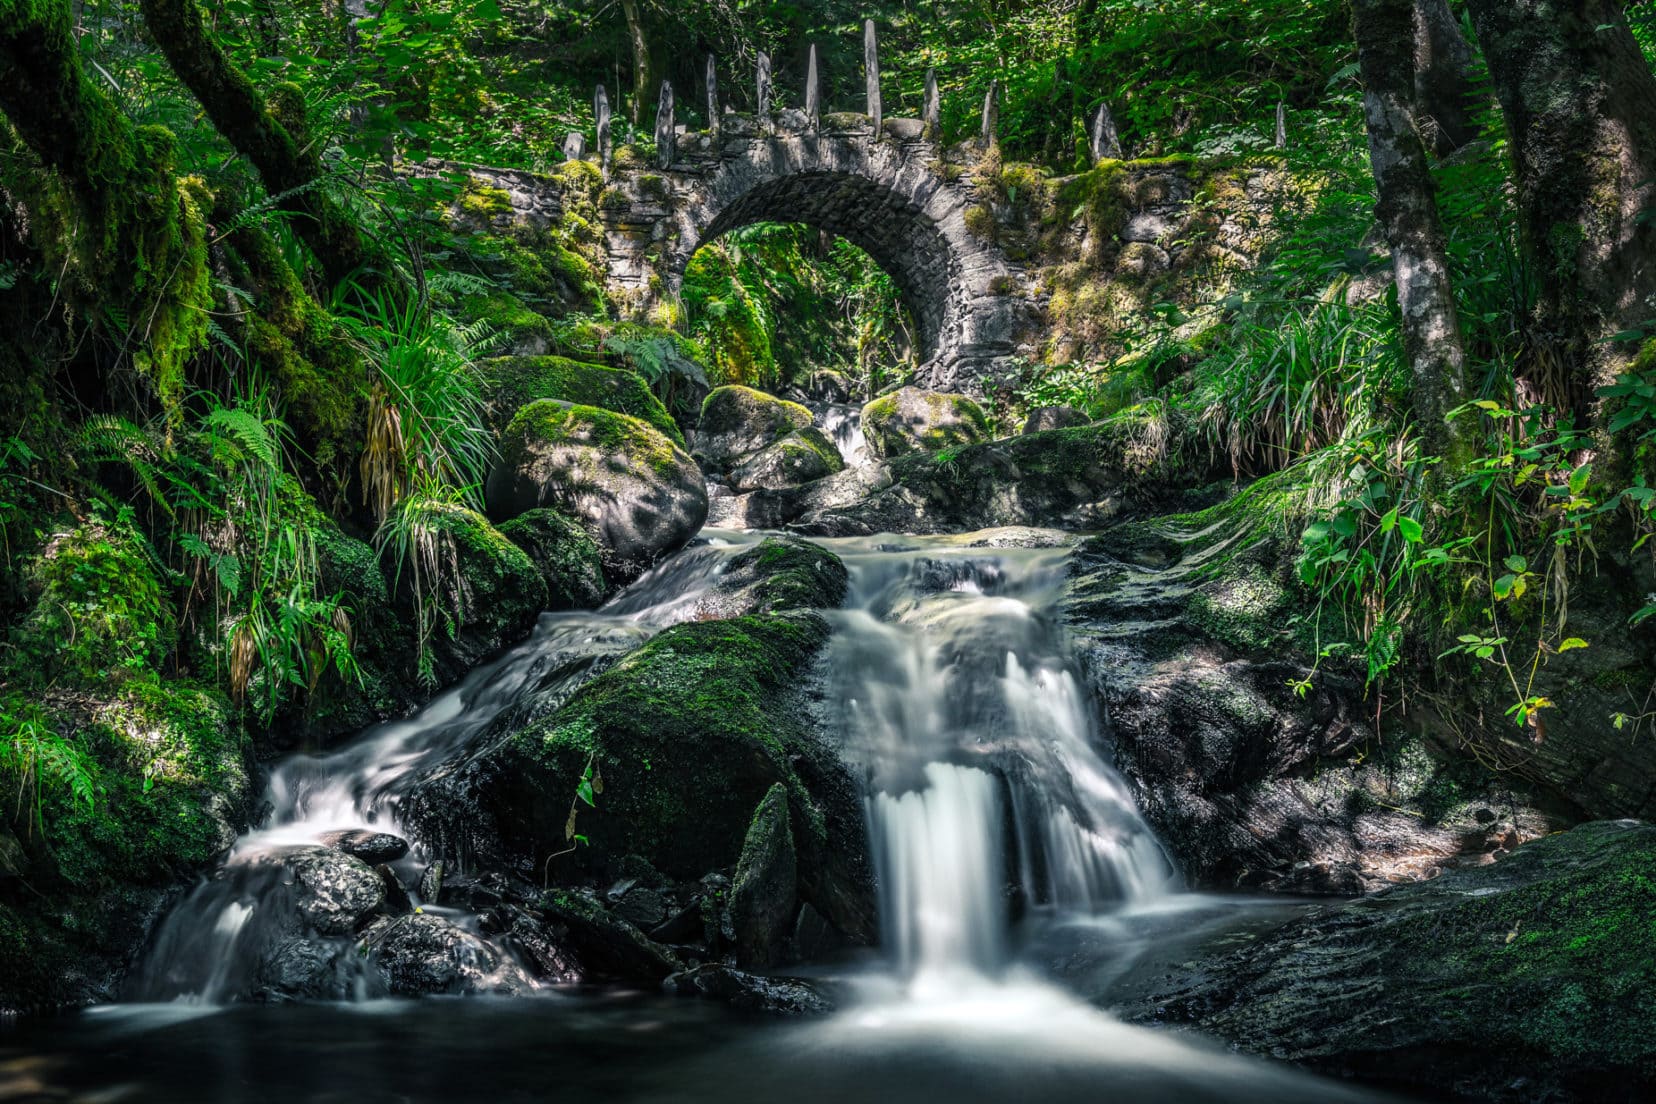 long exposure shot of stream with curved stone bridge in background